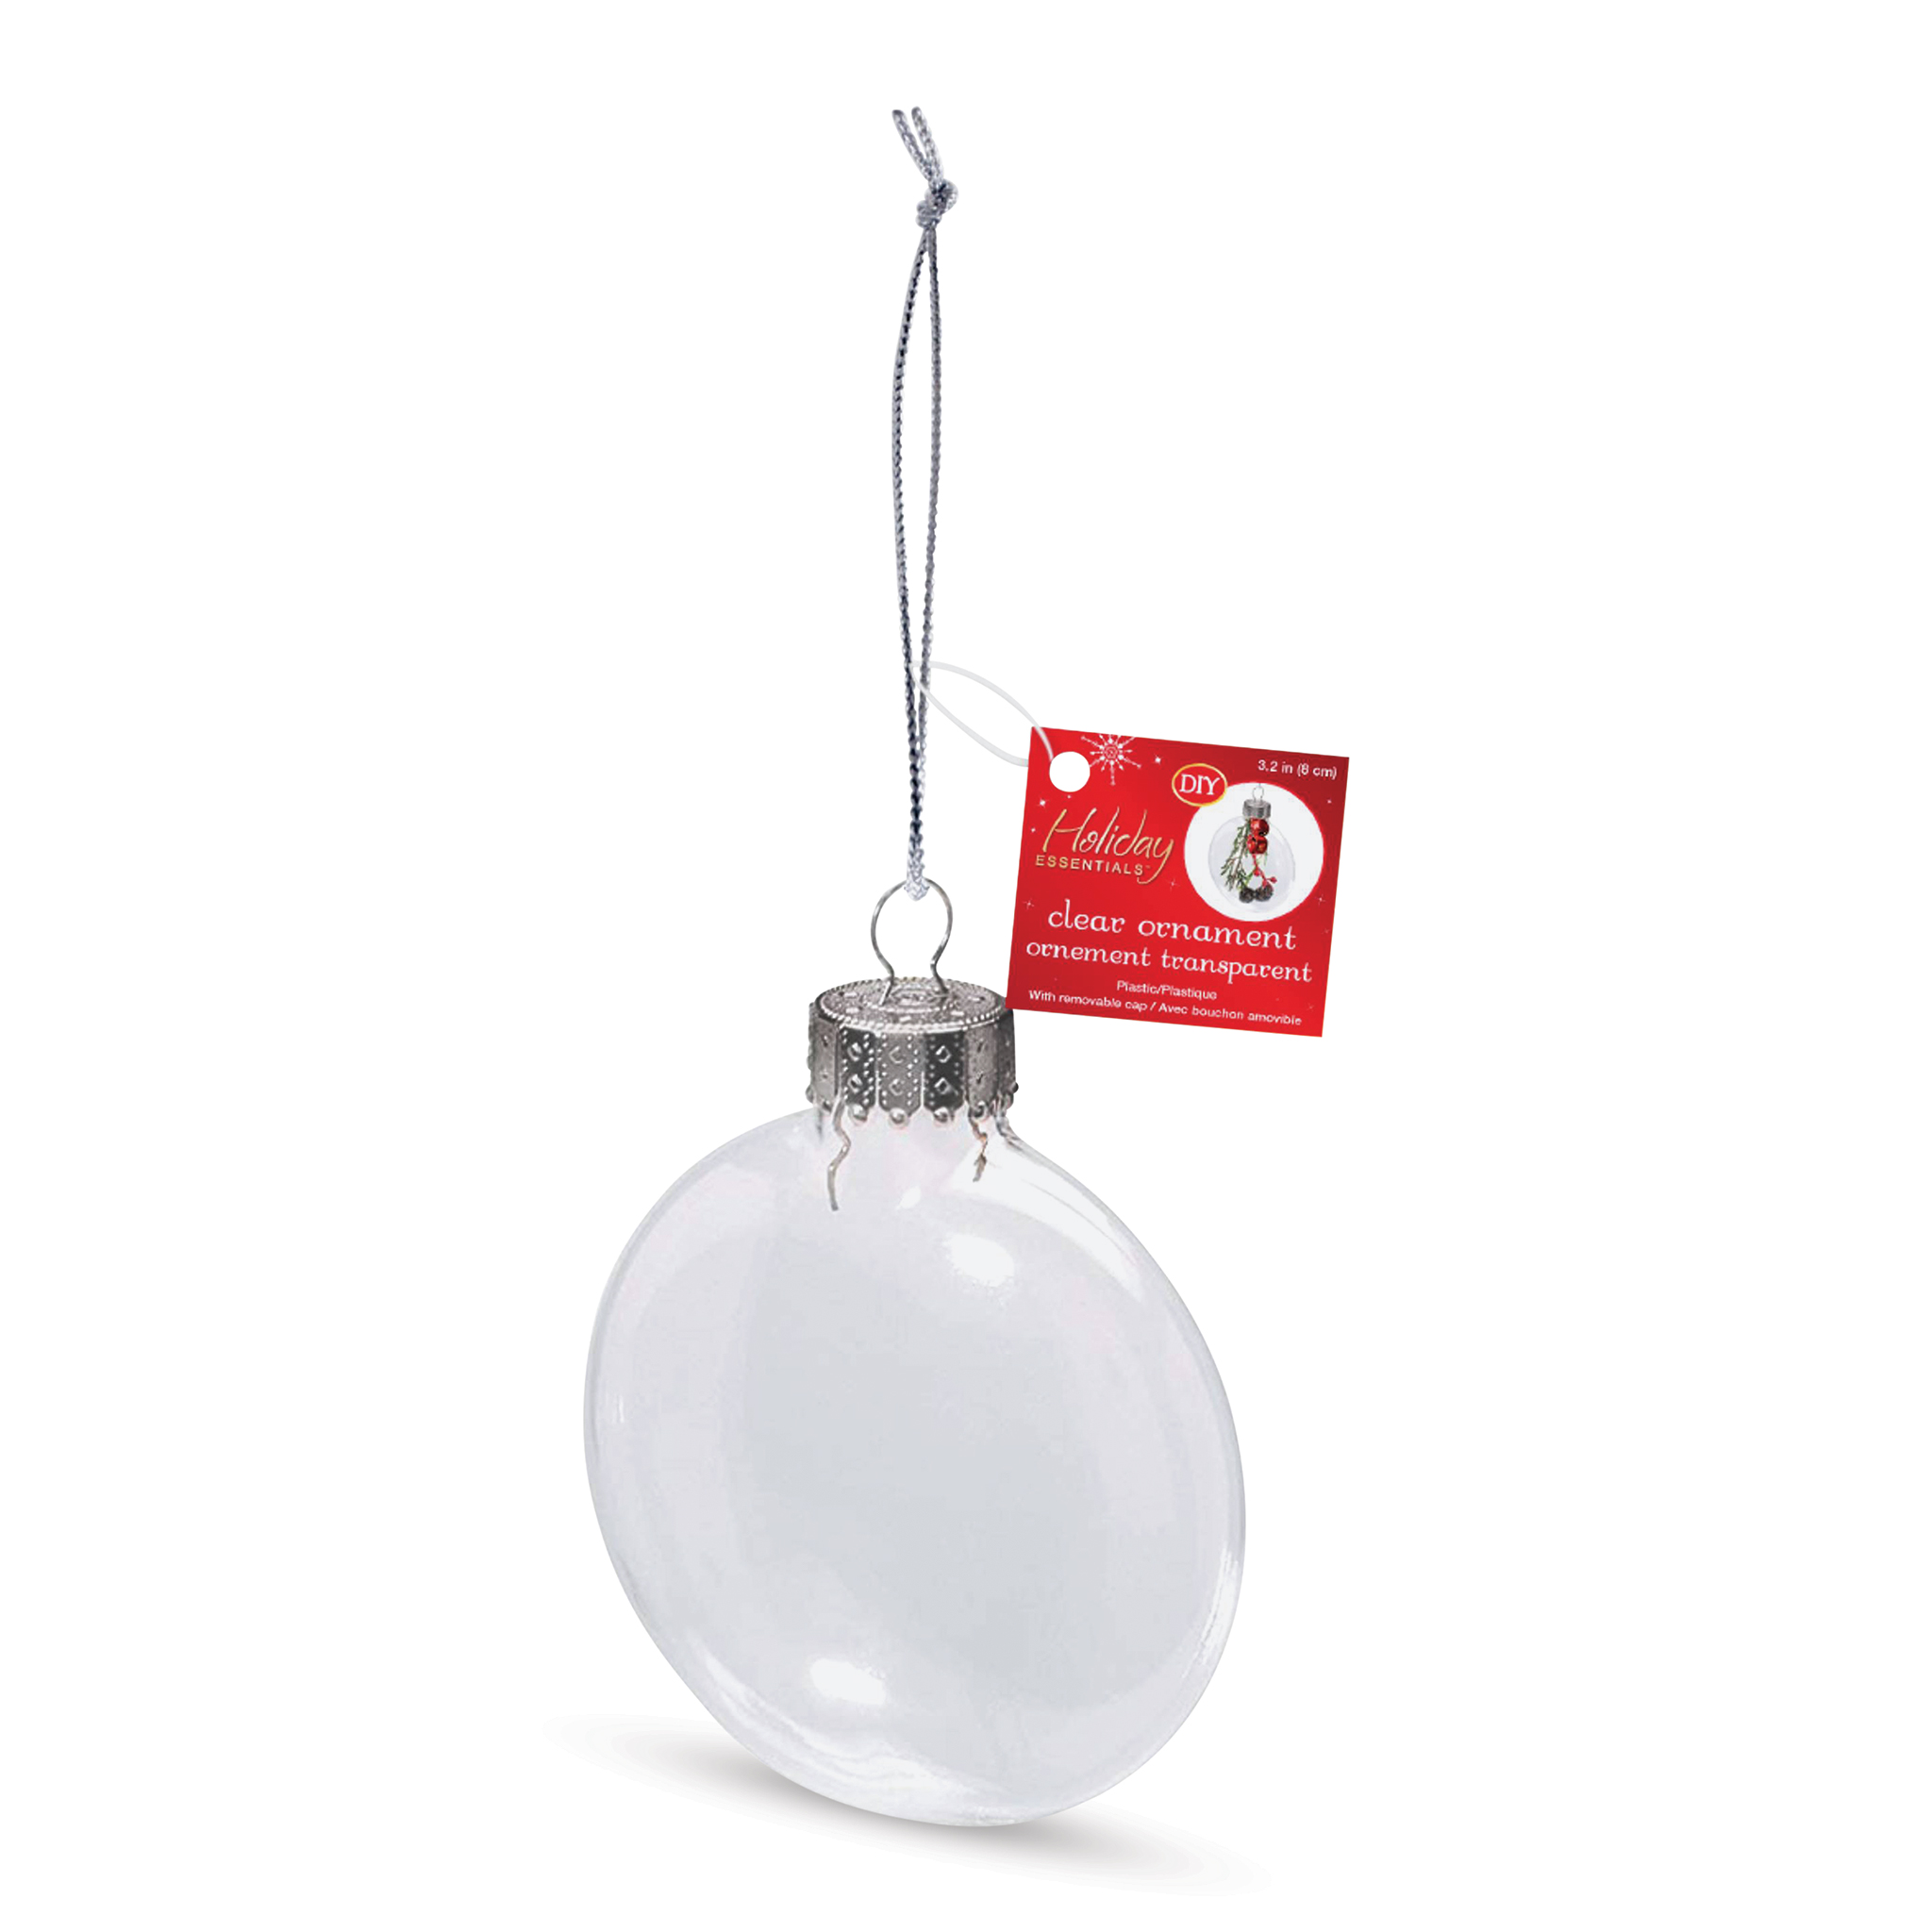 MultiCraft Holiday Essentials Clear Plastic Ornaments